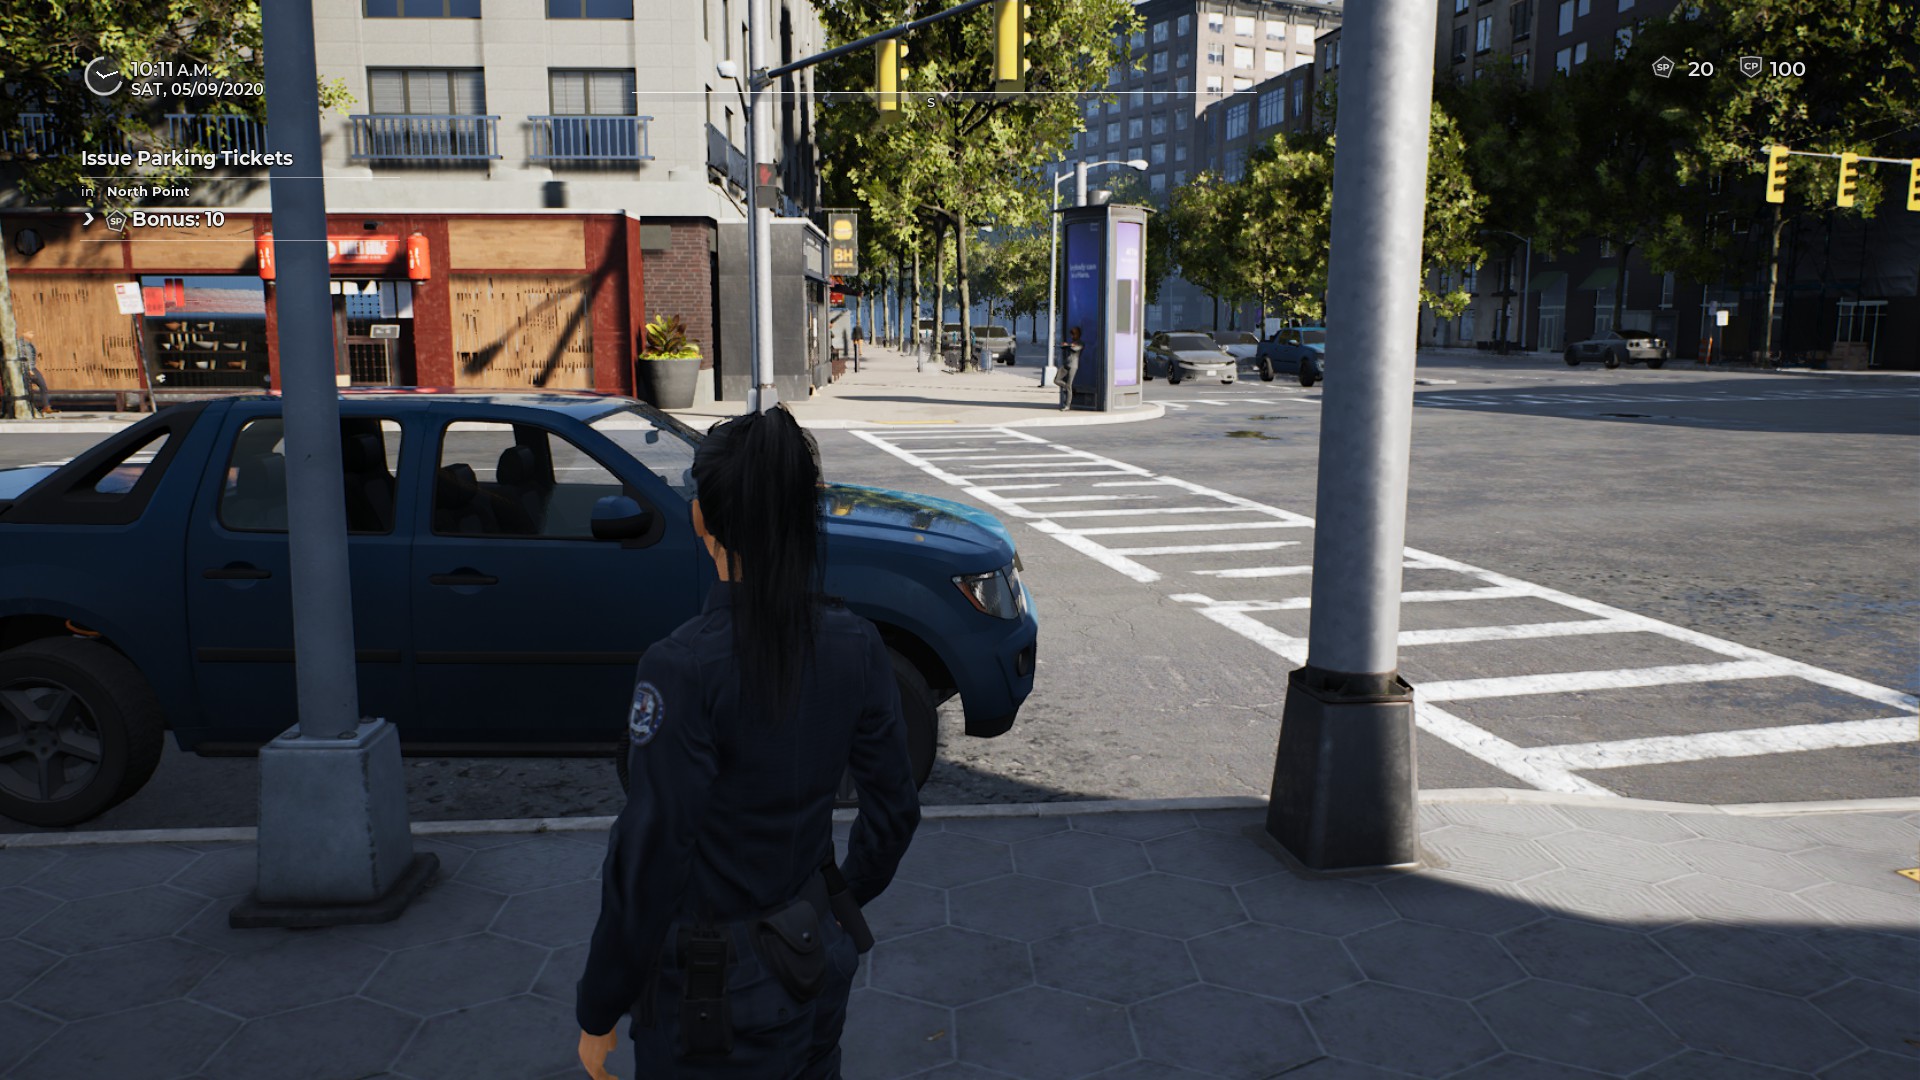 Police Simulator: Patrol Officers - Parking Guide with Pictures